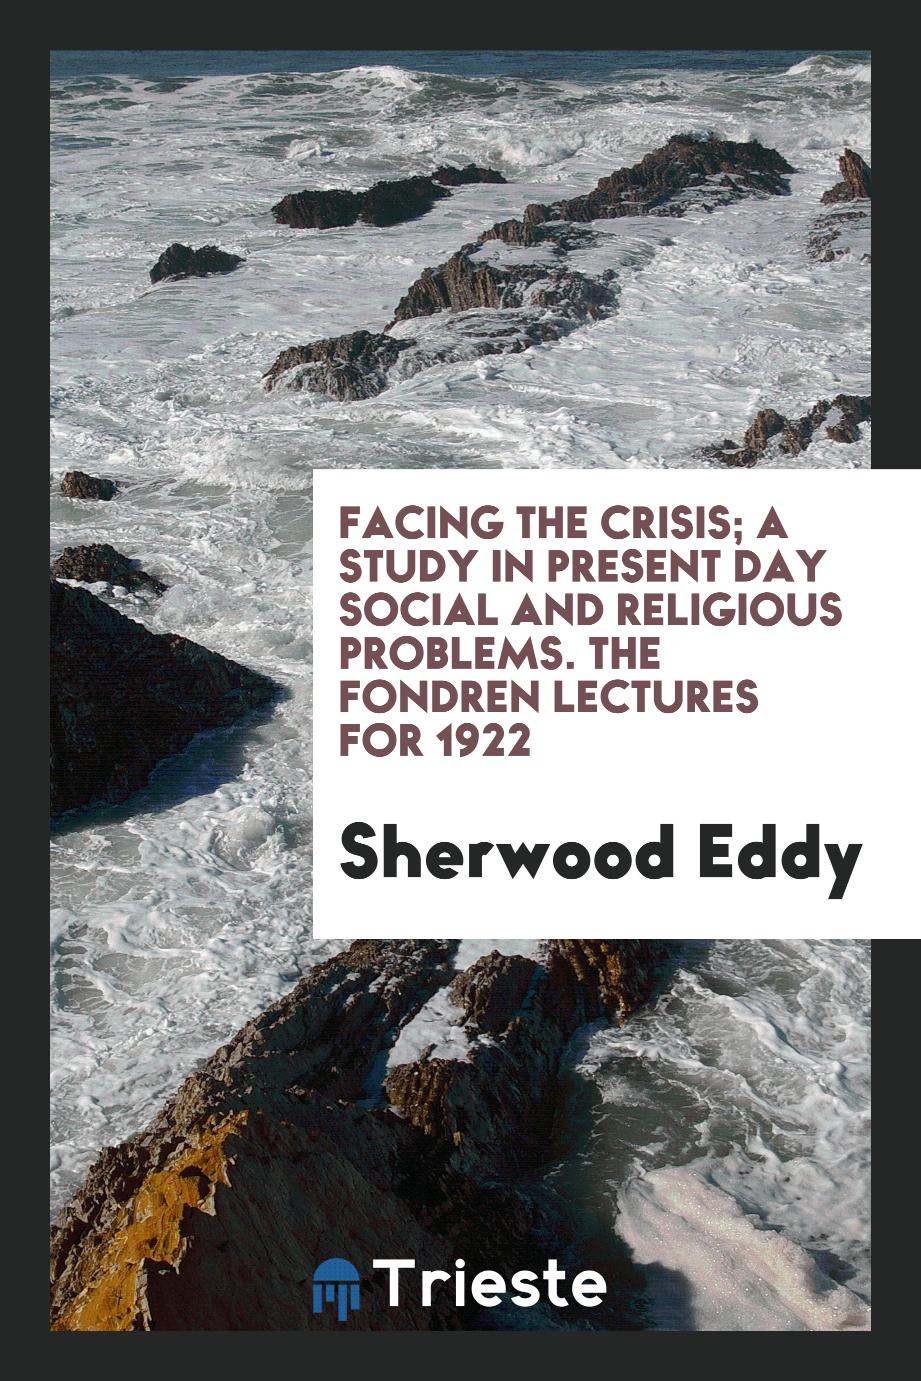 Facing the crisis; a study in present day social and religious problems. The fondren lectures for 1922